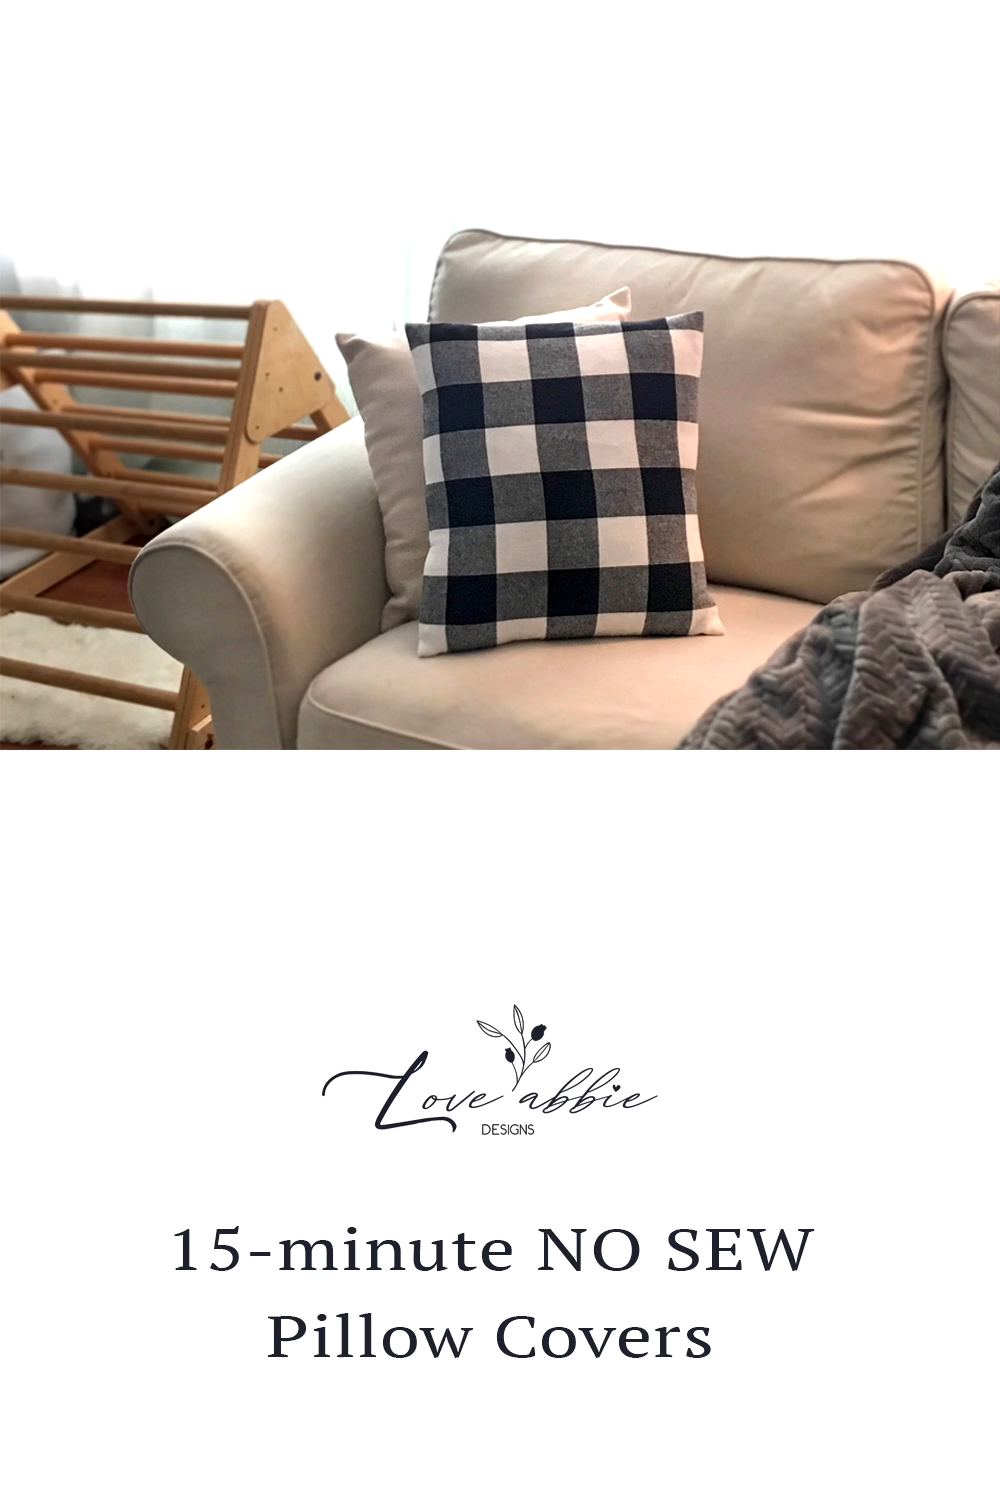 15 Minute No-Sew DIY Pillow Covers - 15 Minute No-Sew DIY Pillow Covers -   diy Pillows couch